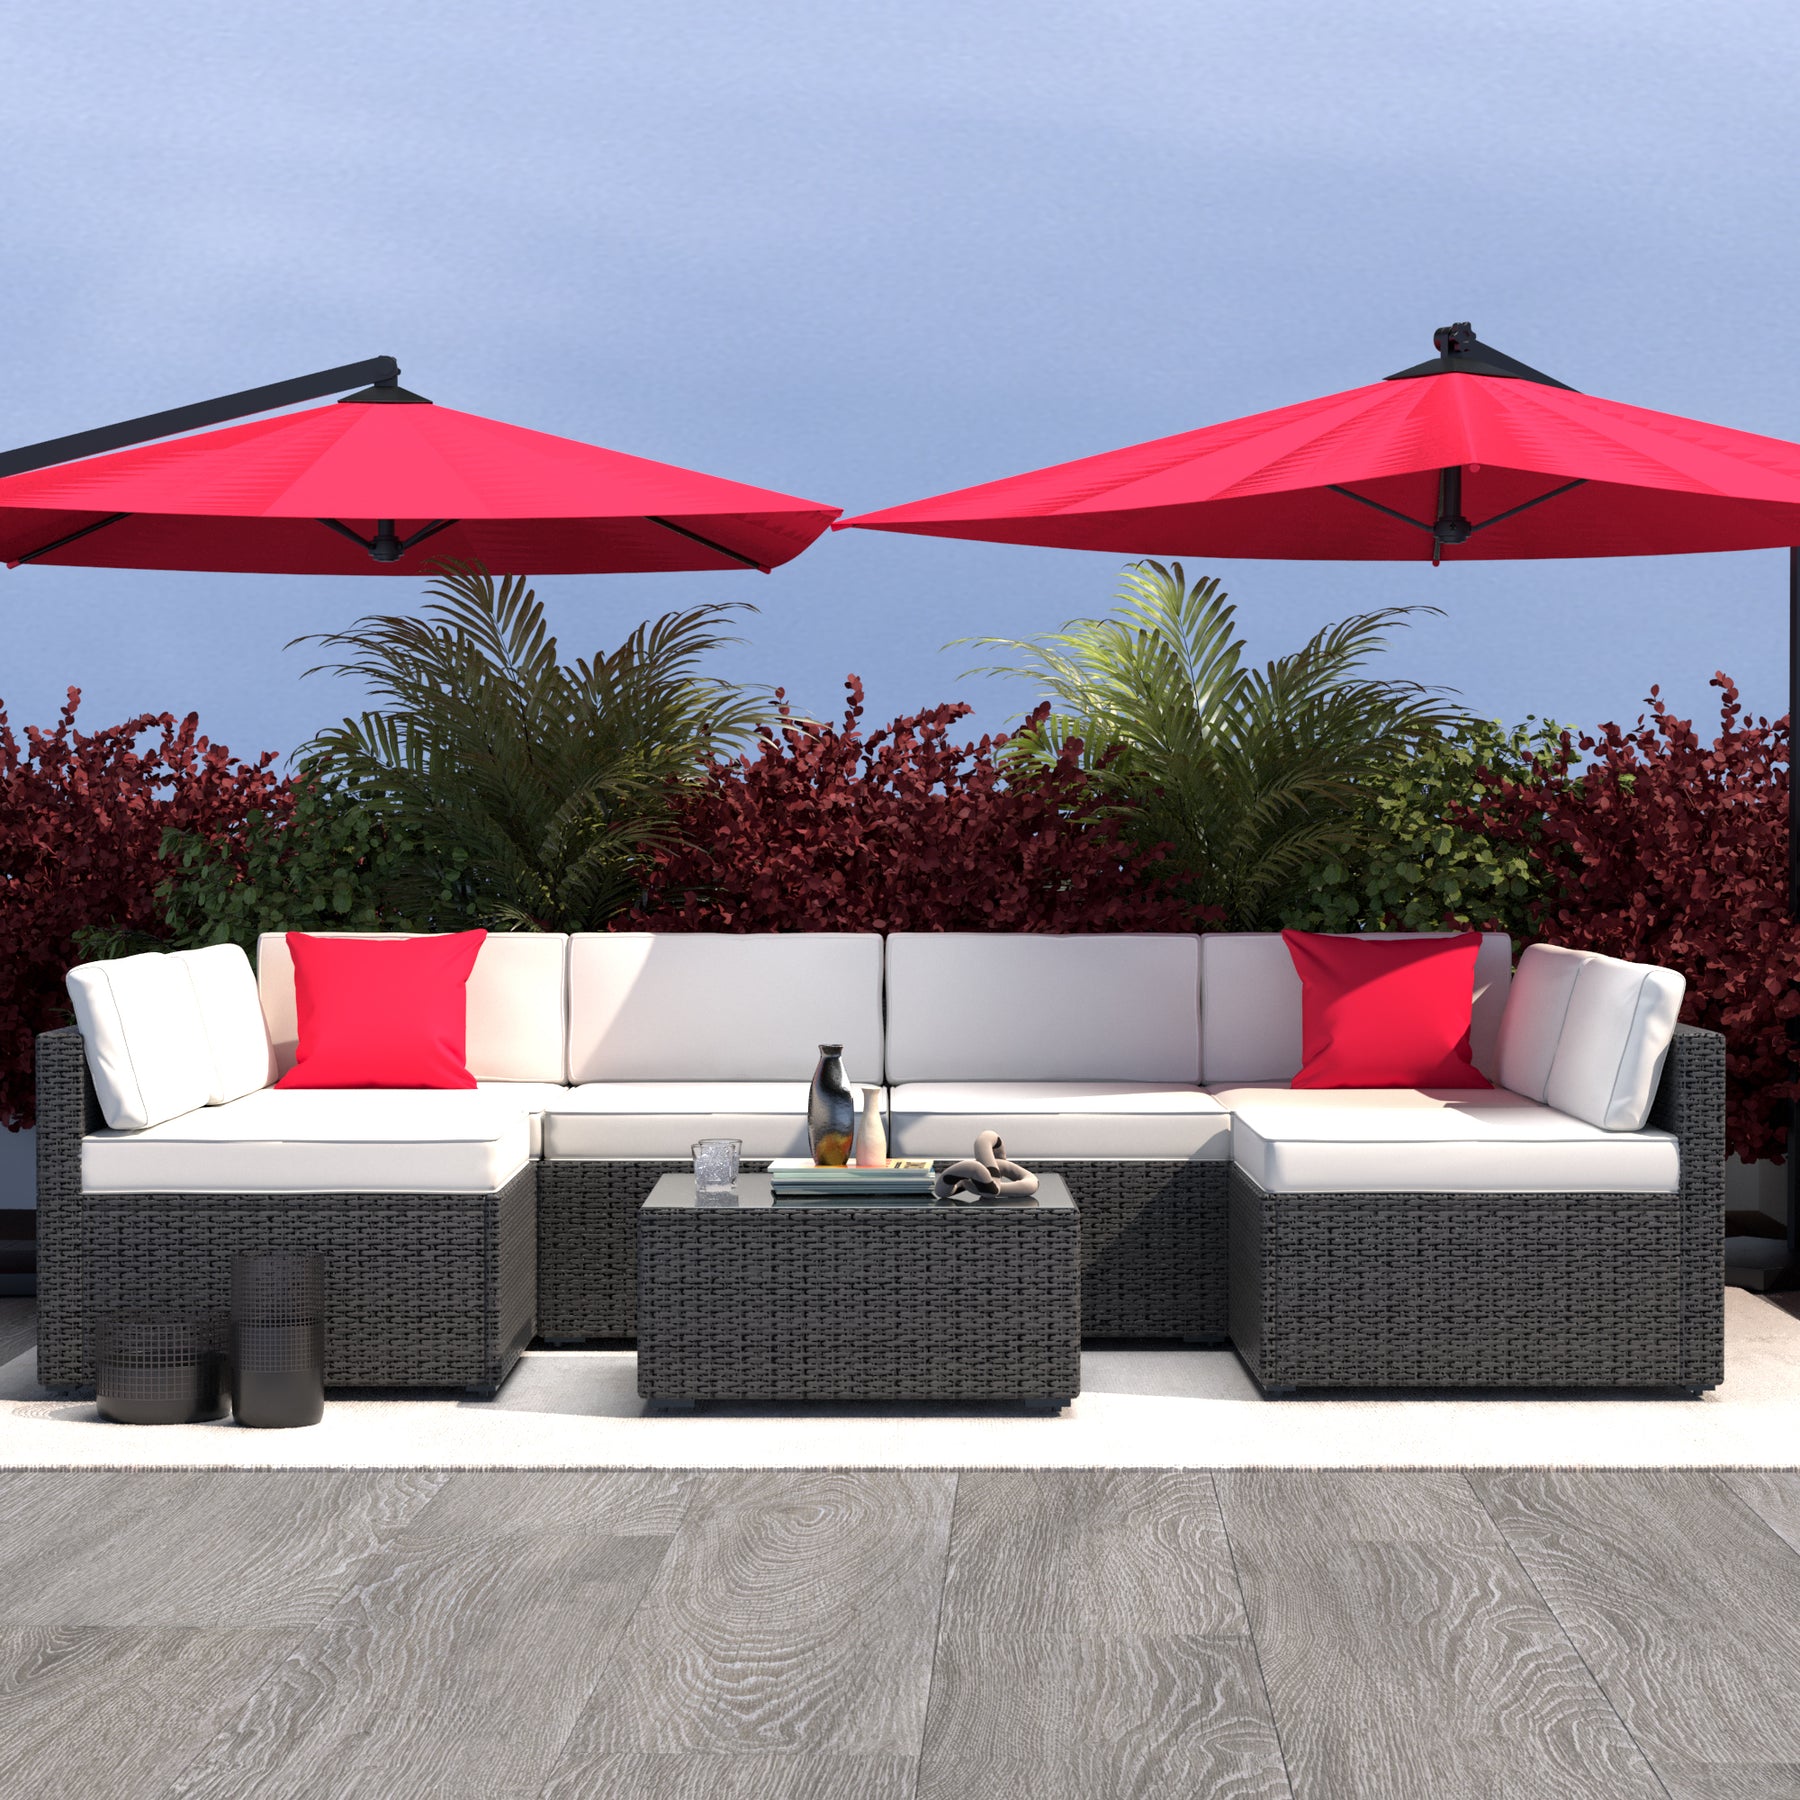 Introducing Sunscape: The Perfect Blend of Style and Comfort for Your Outdoor Oasis, written by Graham Colligan